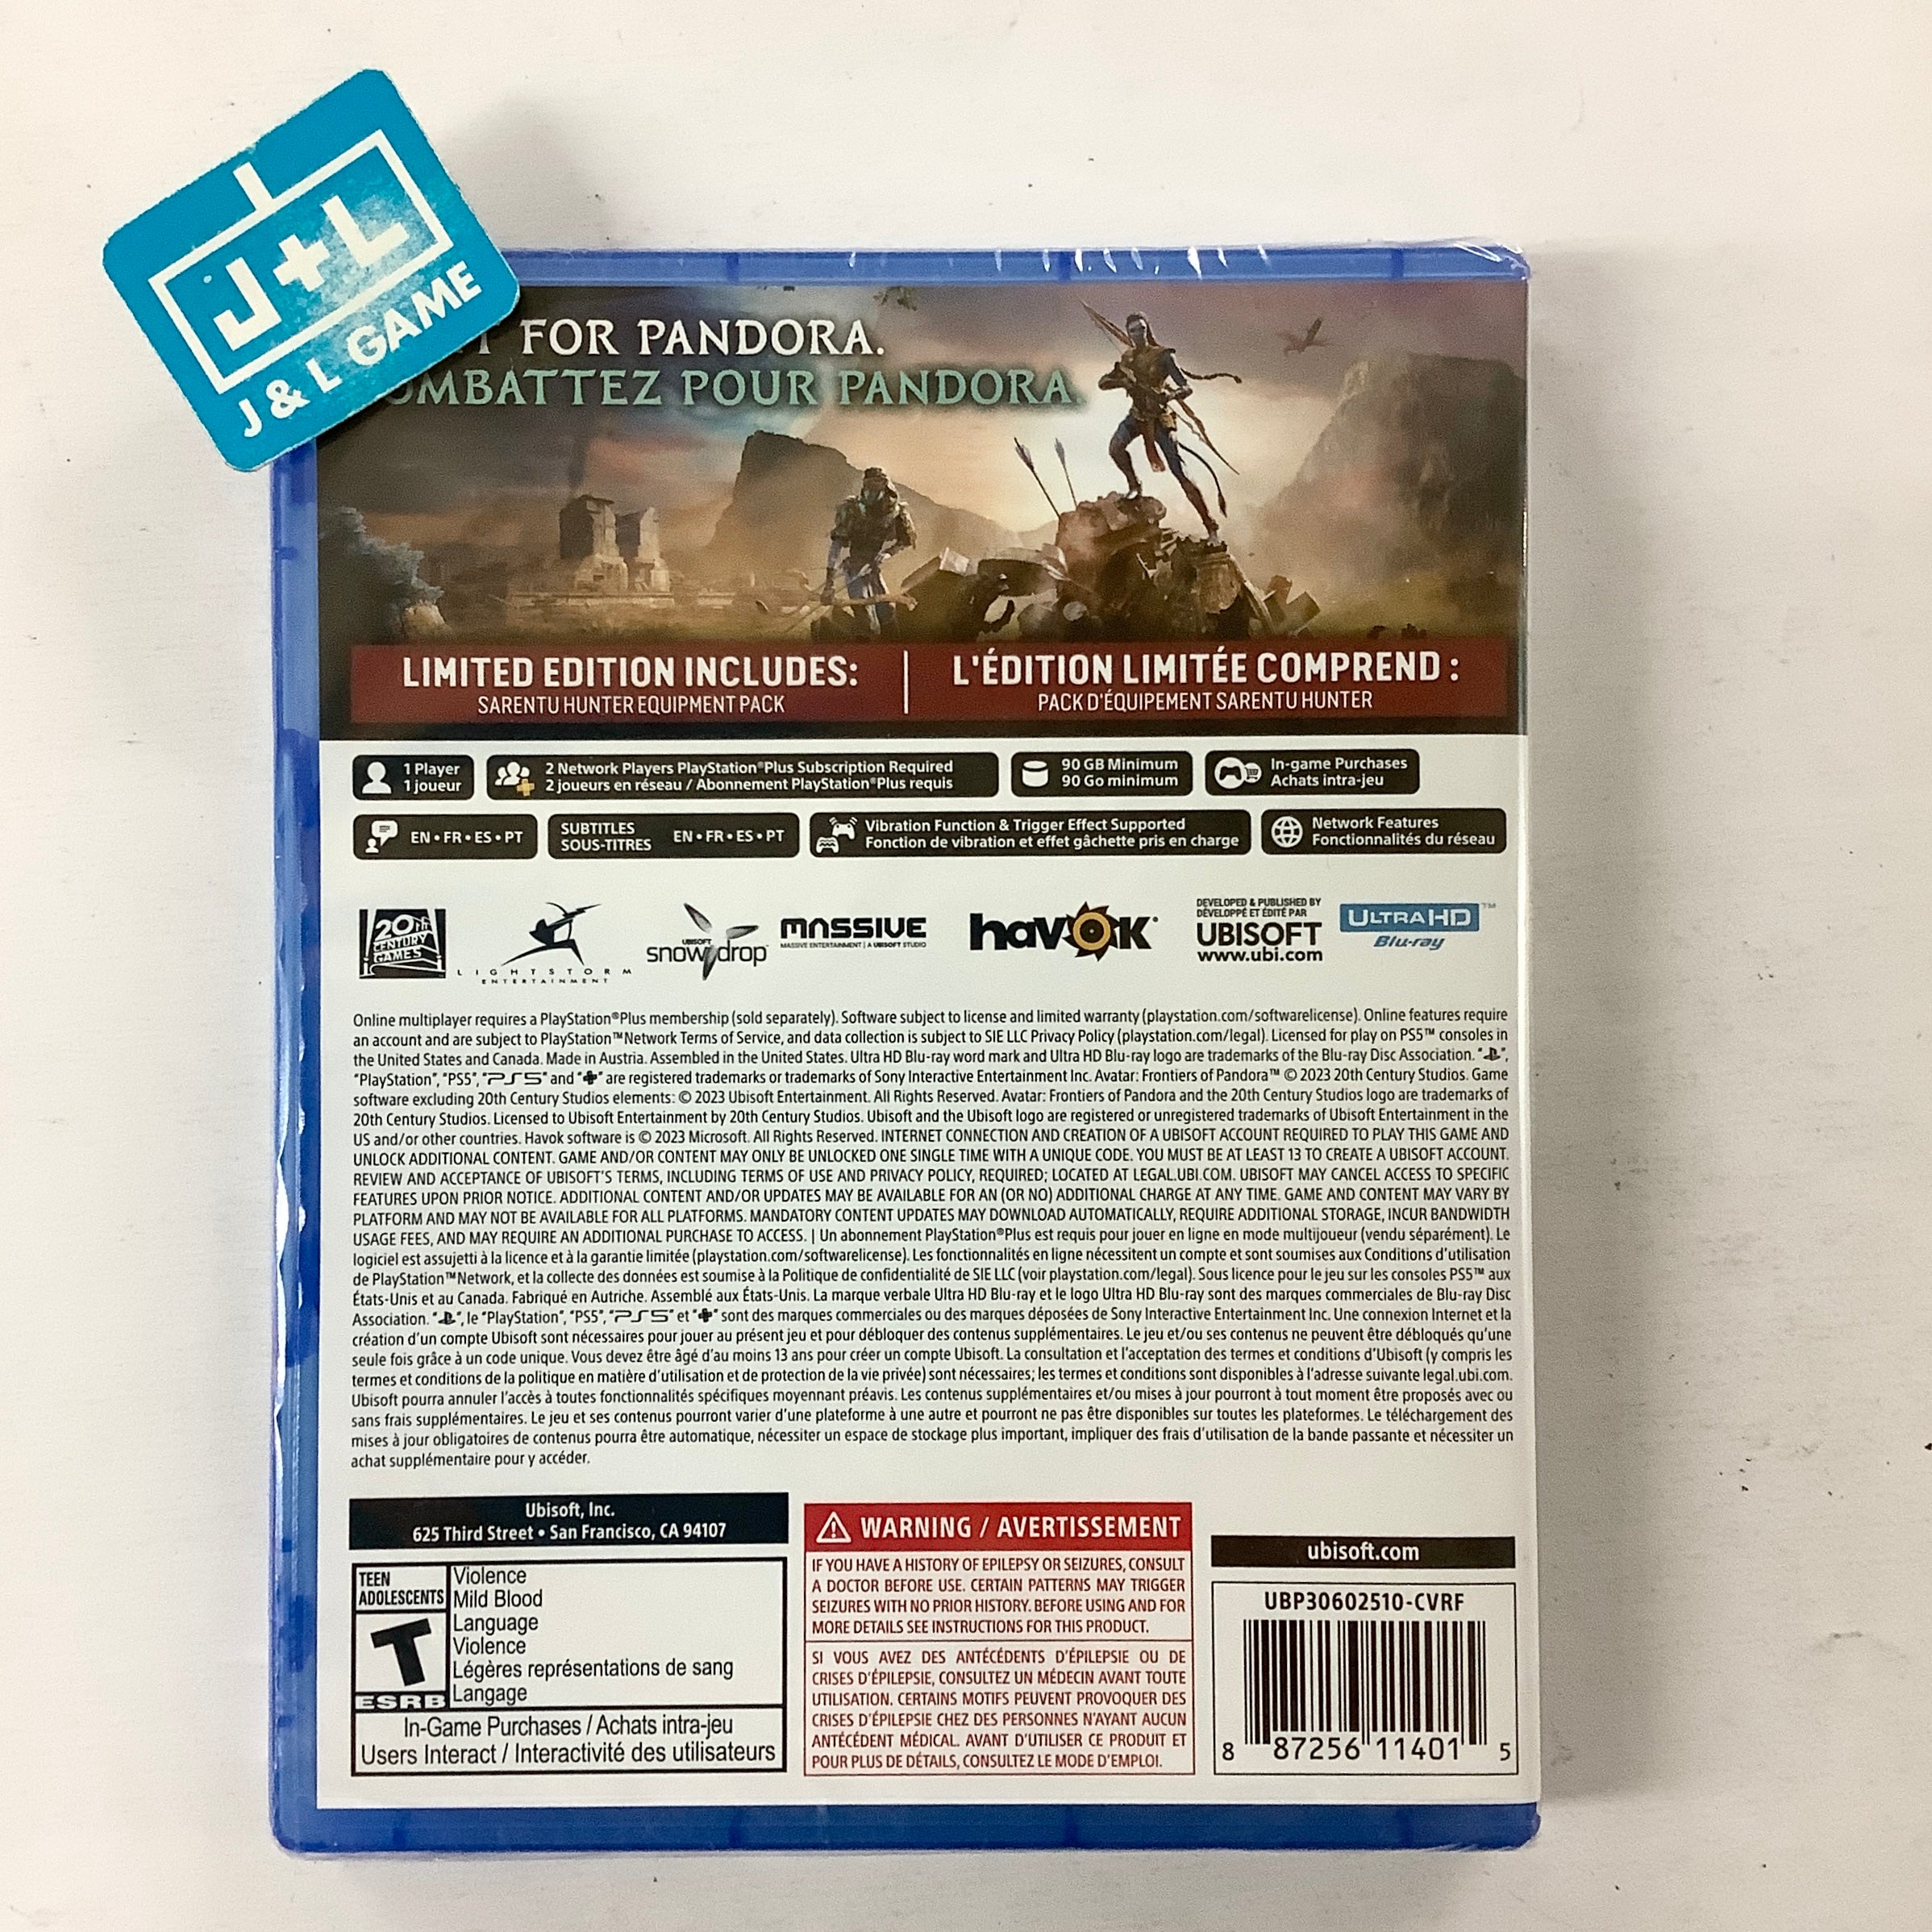 Avatar: Frontiers of Pandora (Limited Edition) - (PS5) Playstation 5 Video Games Ubisoft   